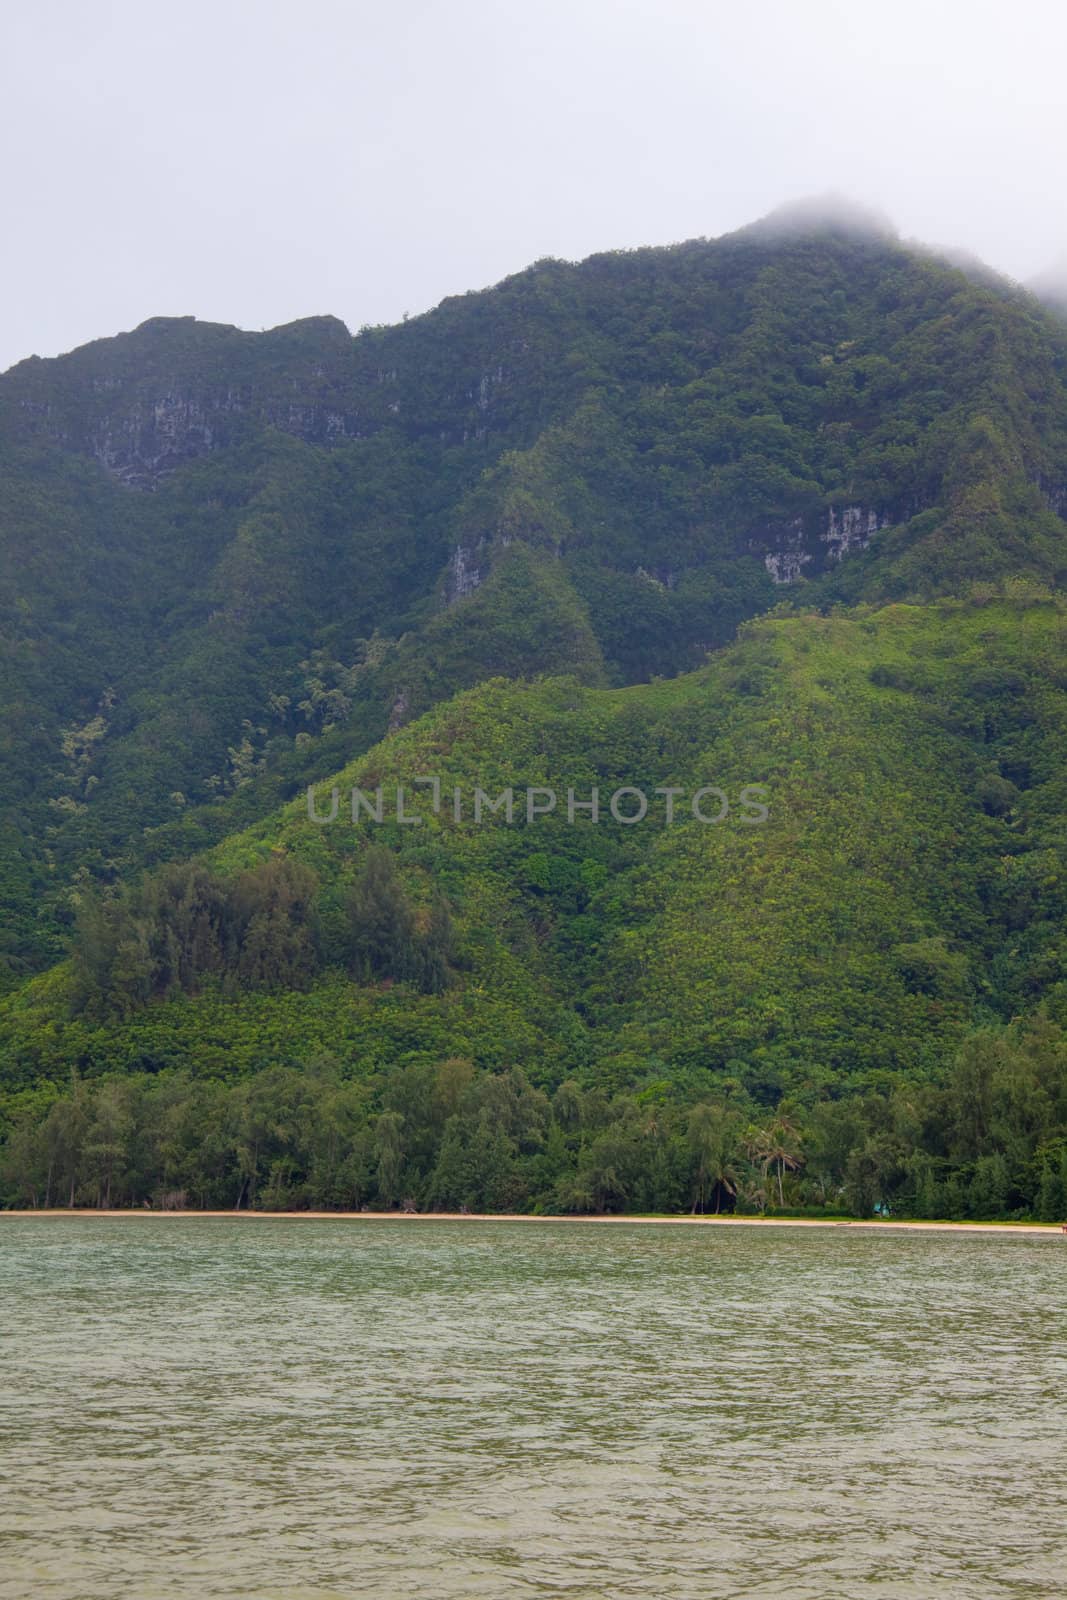 Lush vegetation covers some mountains in oahu hawaii.